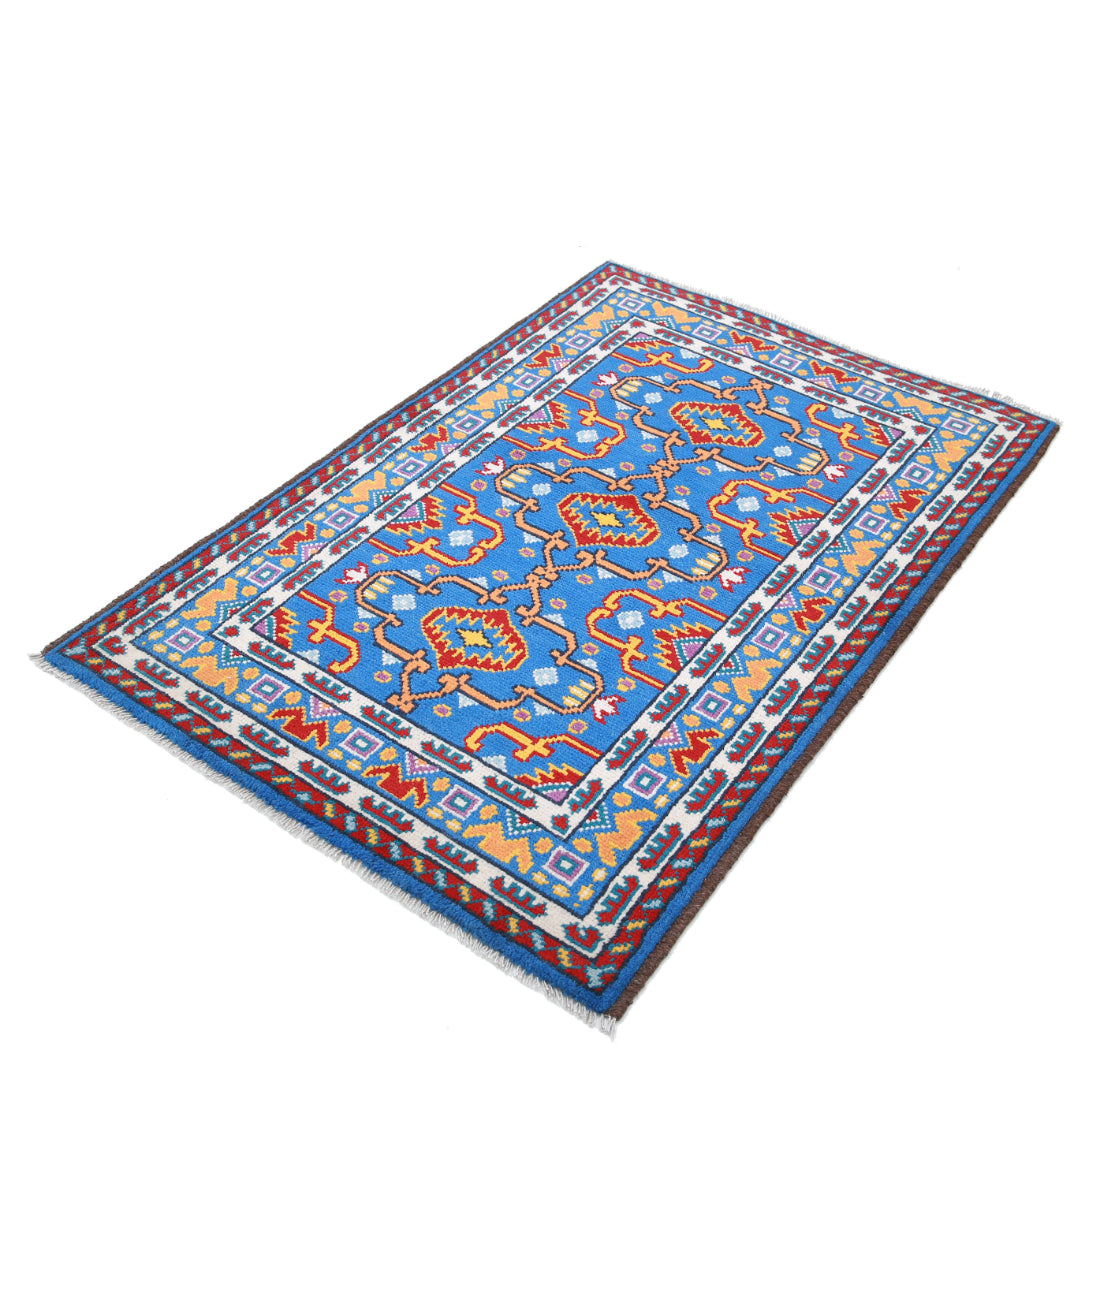 Revival 3'4'' X 4'11'' Hand-Knotted Wool Rug 3'4'' x 4'11'' (100 X 148) / Blue / Red